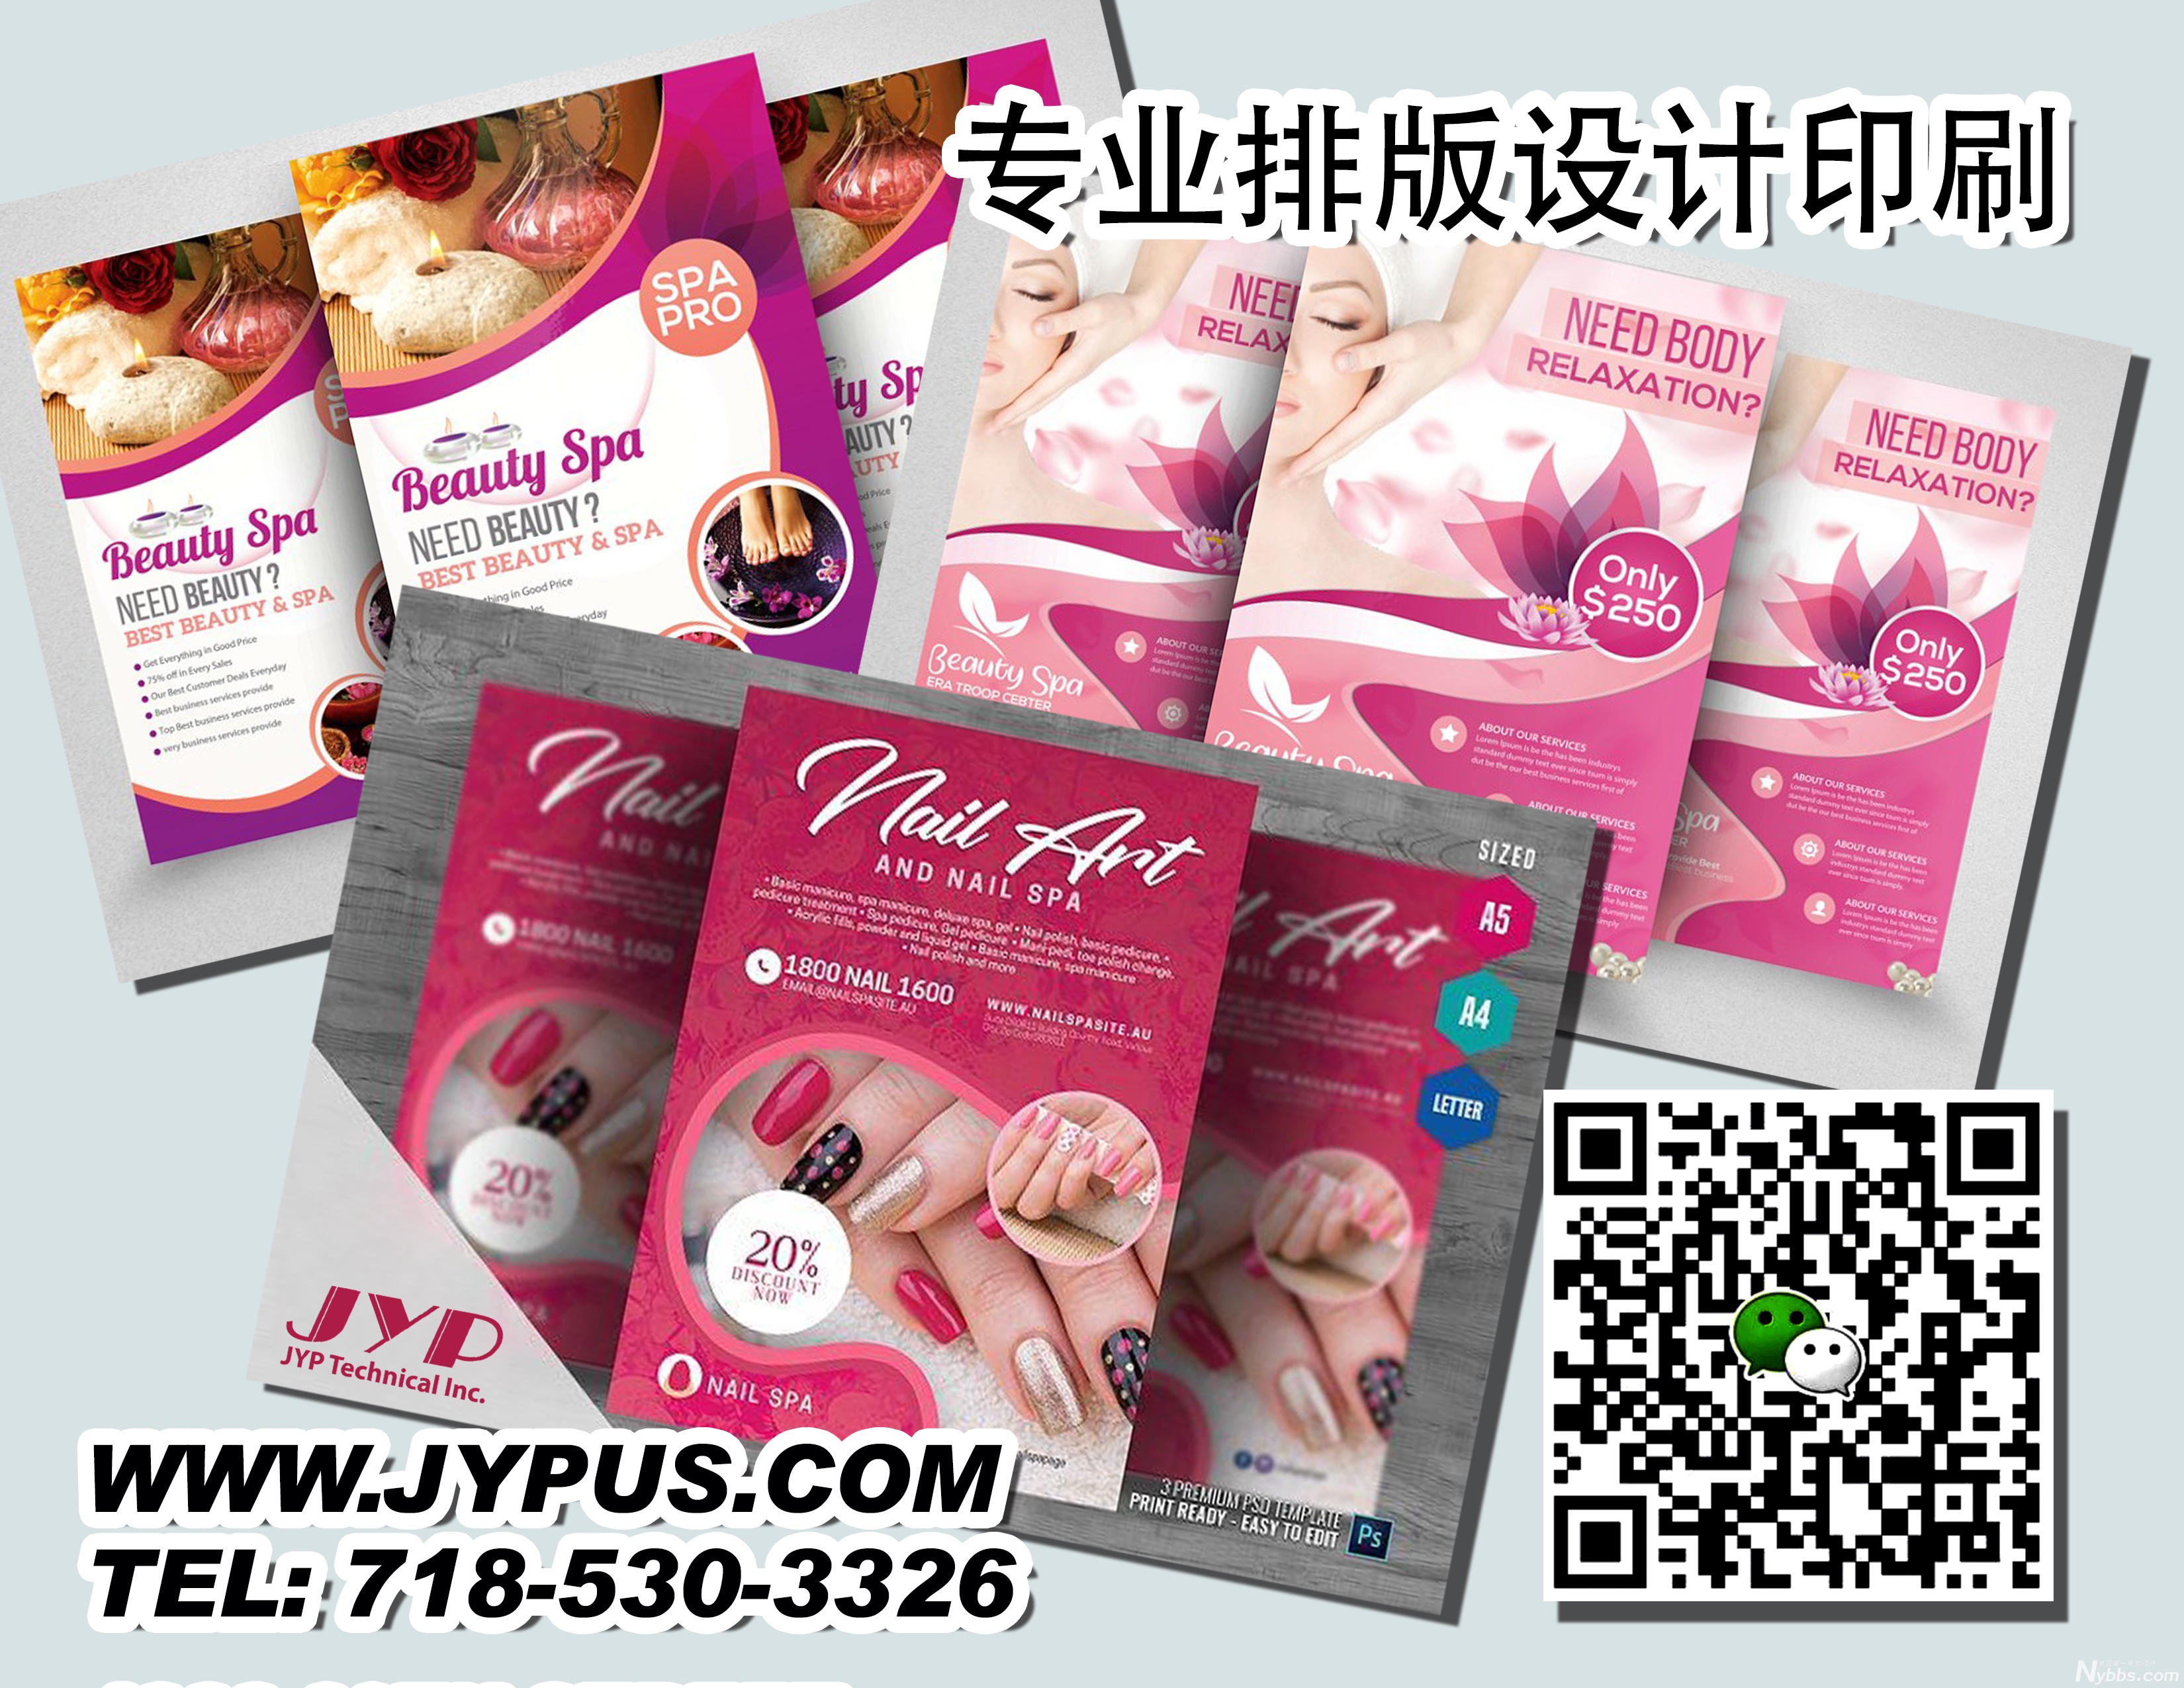 BUSINESS CARDS AD - 2.jpg